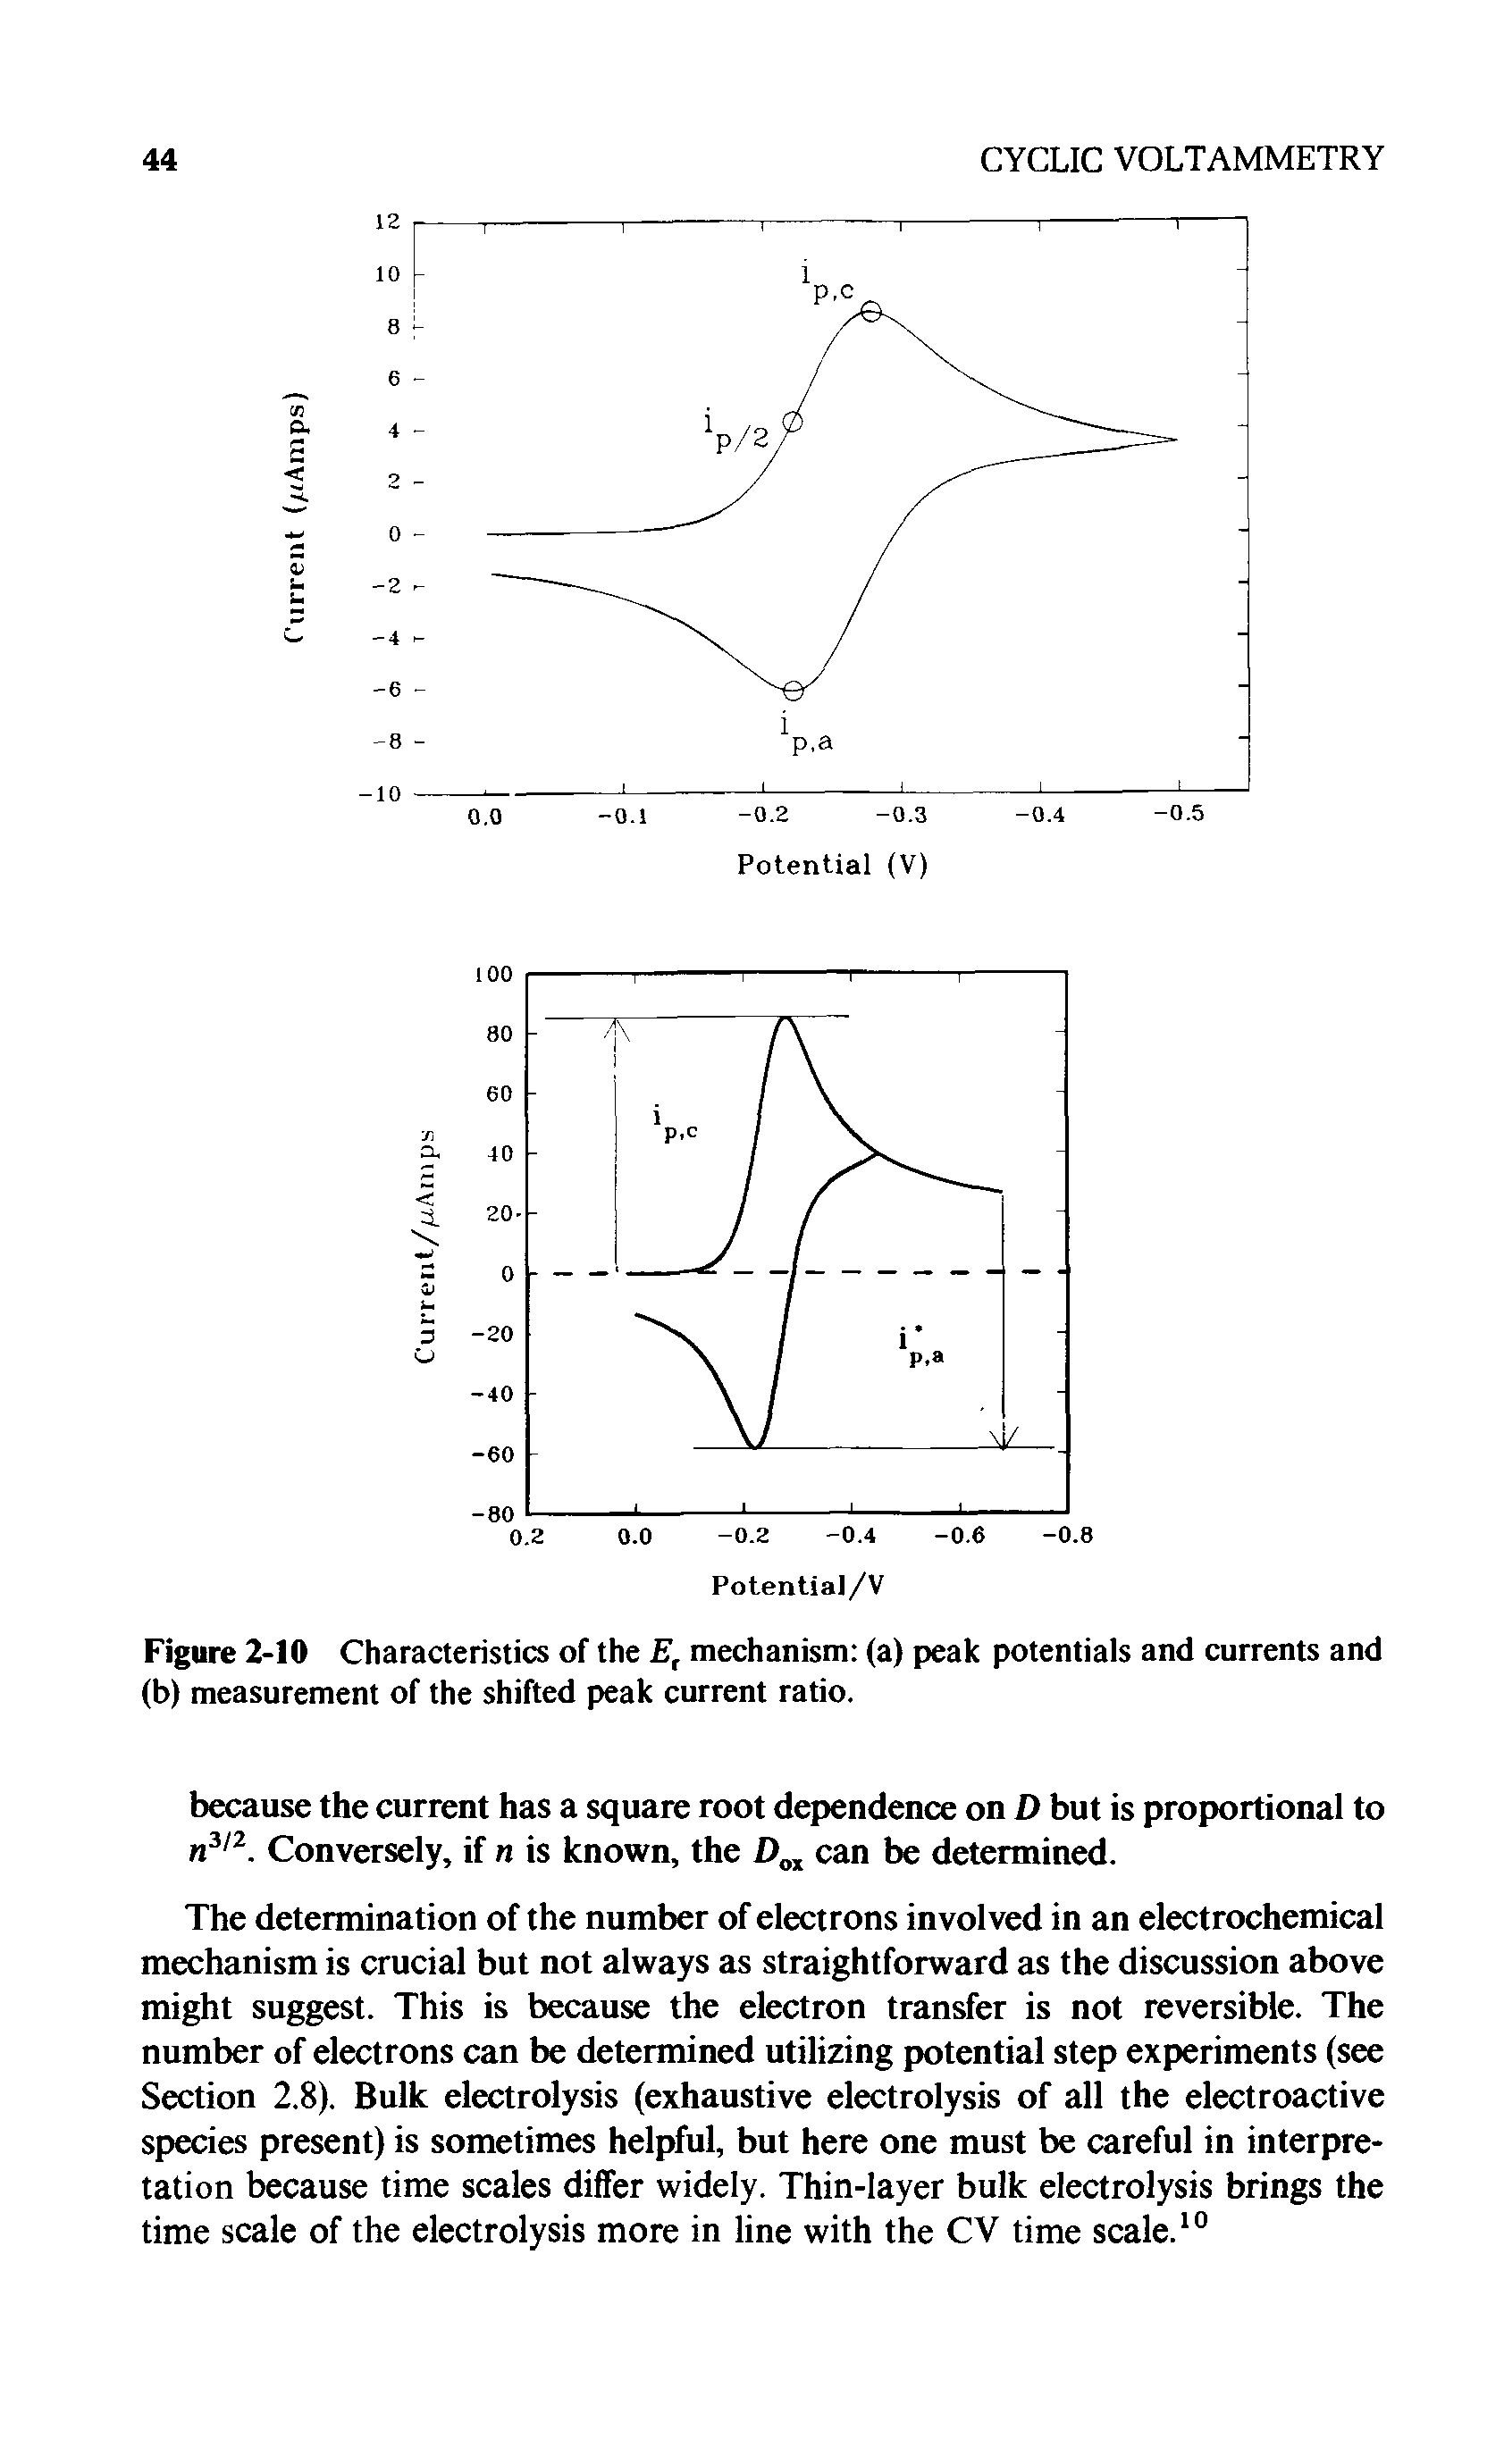 Figure 2-10 Characteristics of the E, mechanism (a) peak potentials and currents and (b) measurement of the shifted peak current ratio.